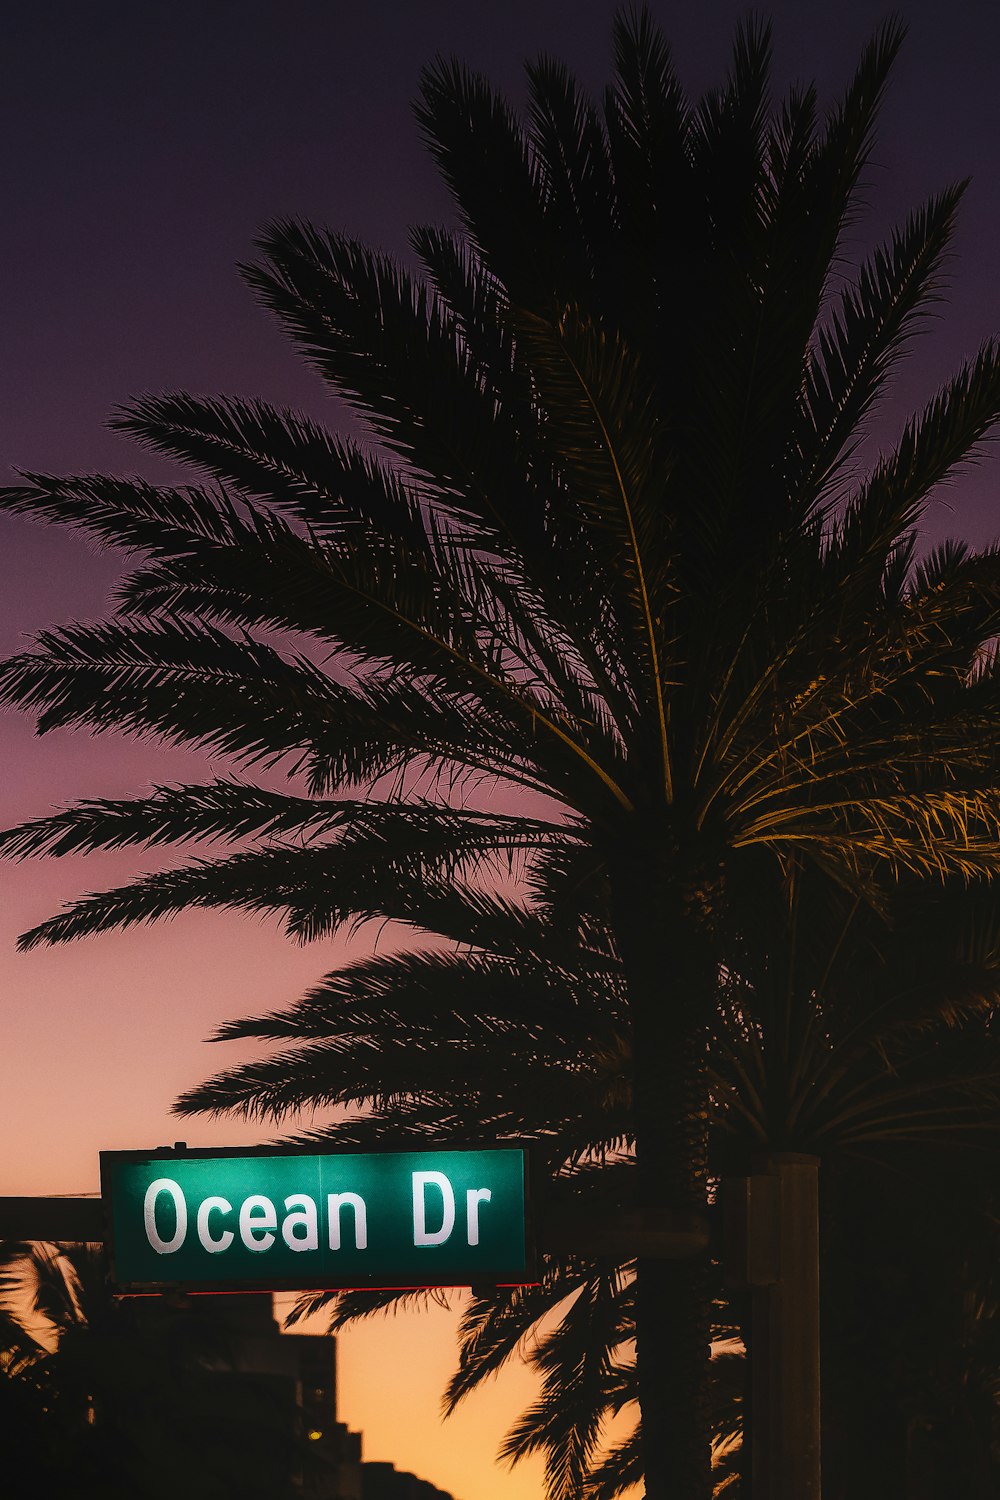 a street sign next to a palm tree